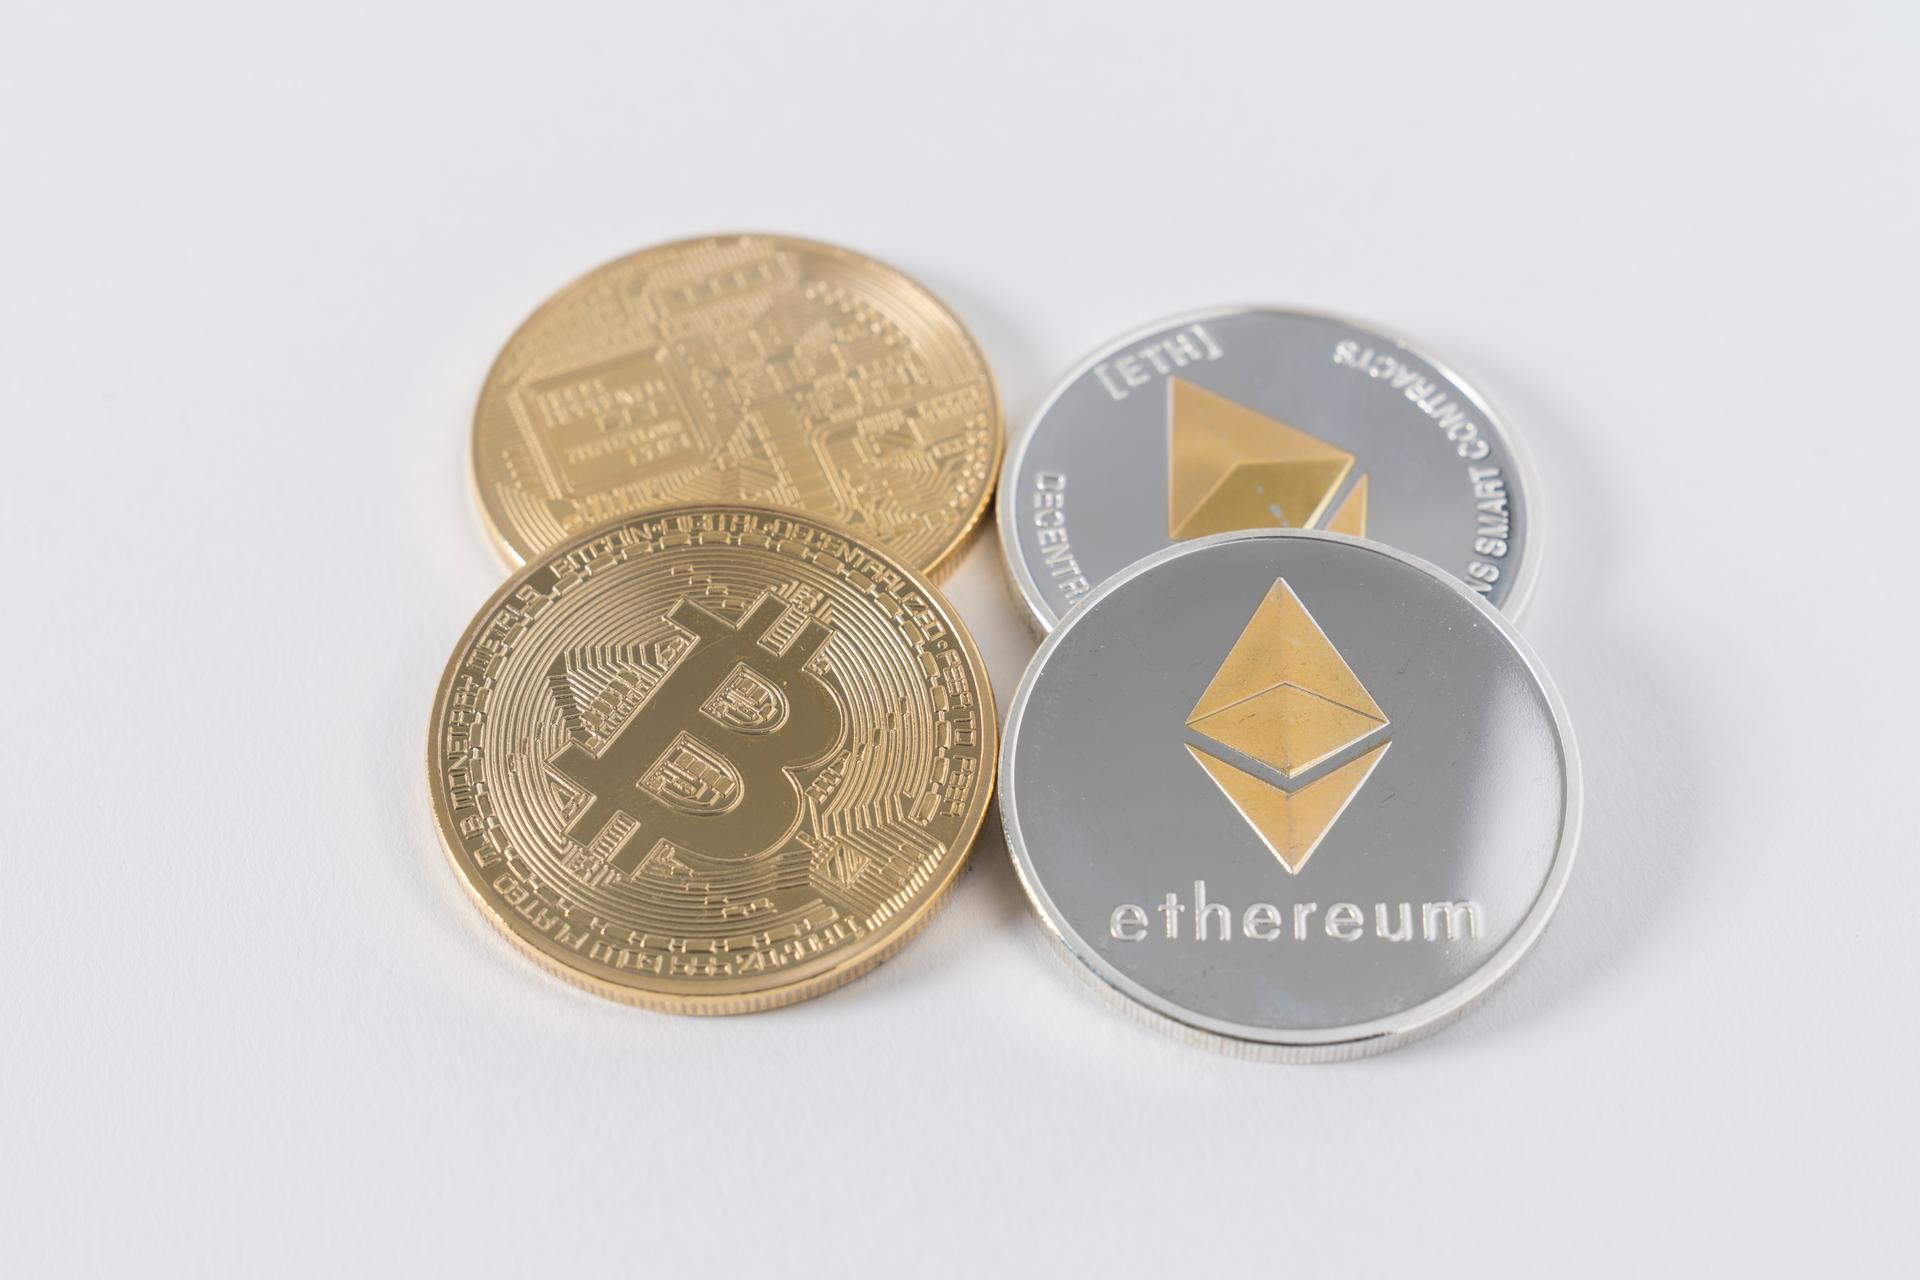 Physical coins with Ethereum and Bitcoin logos.